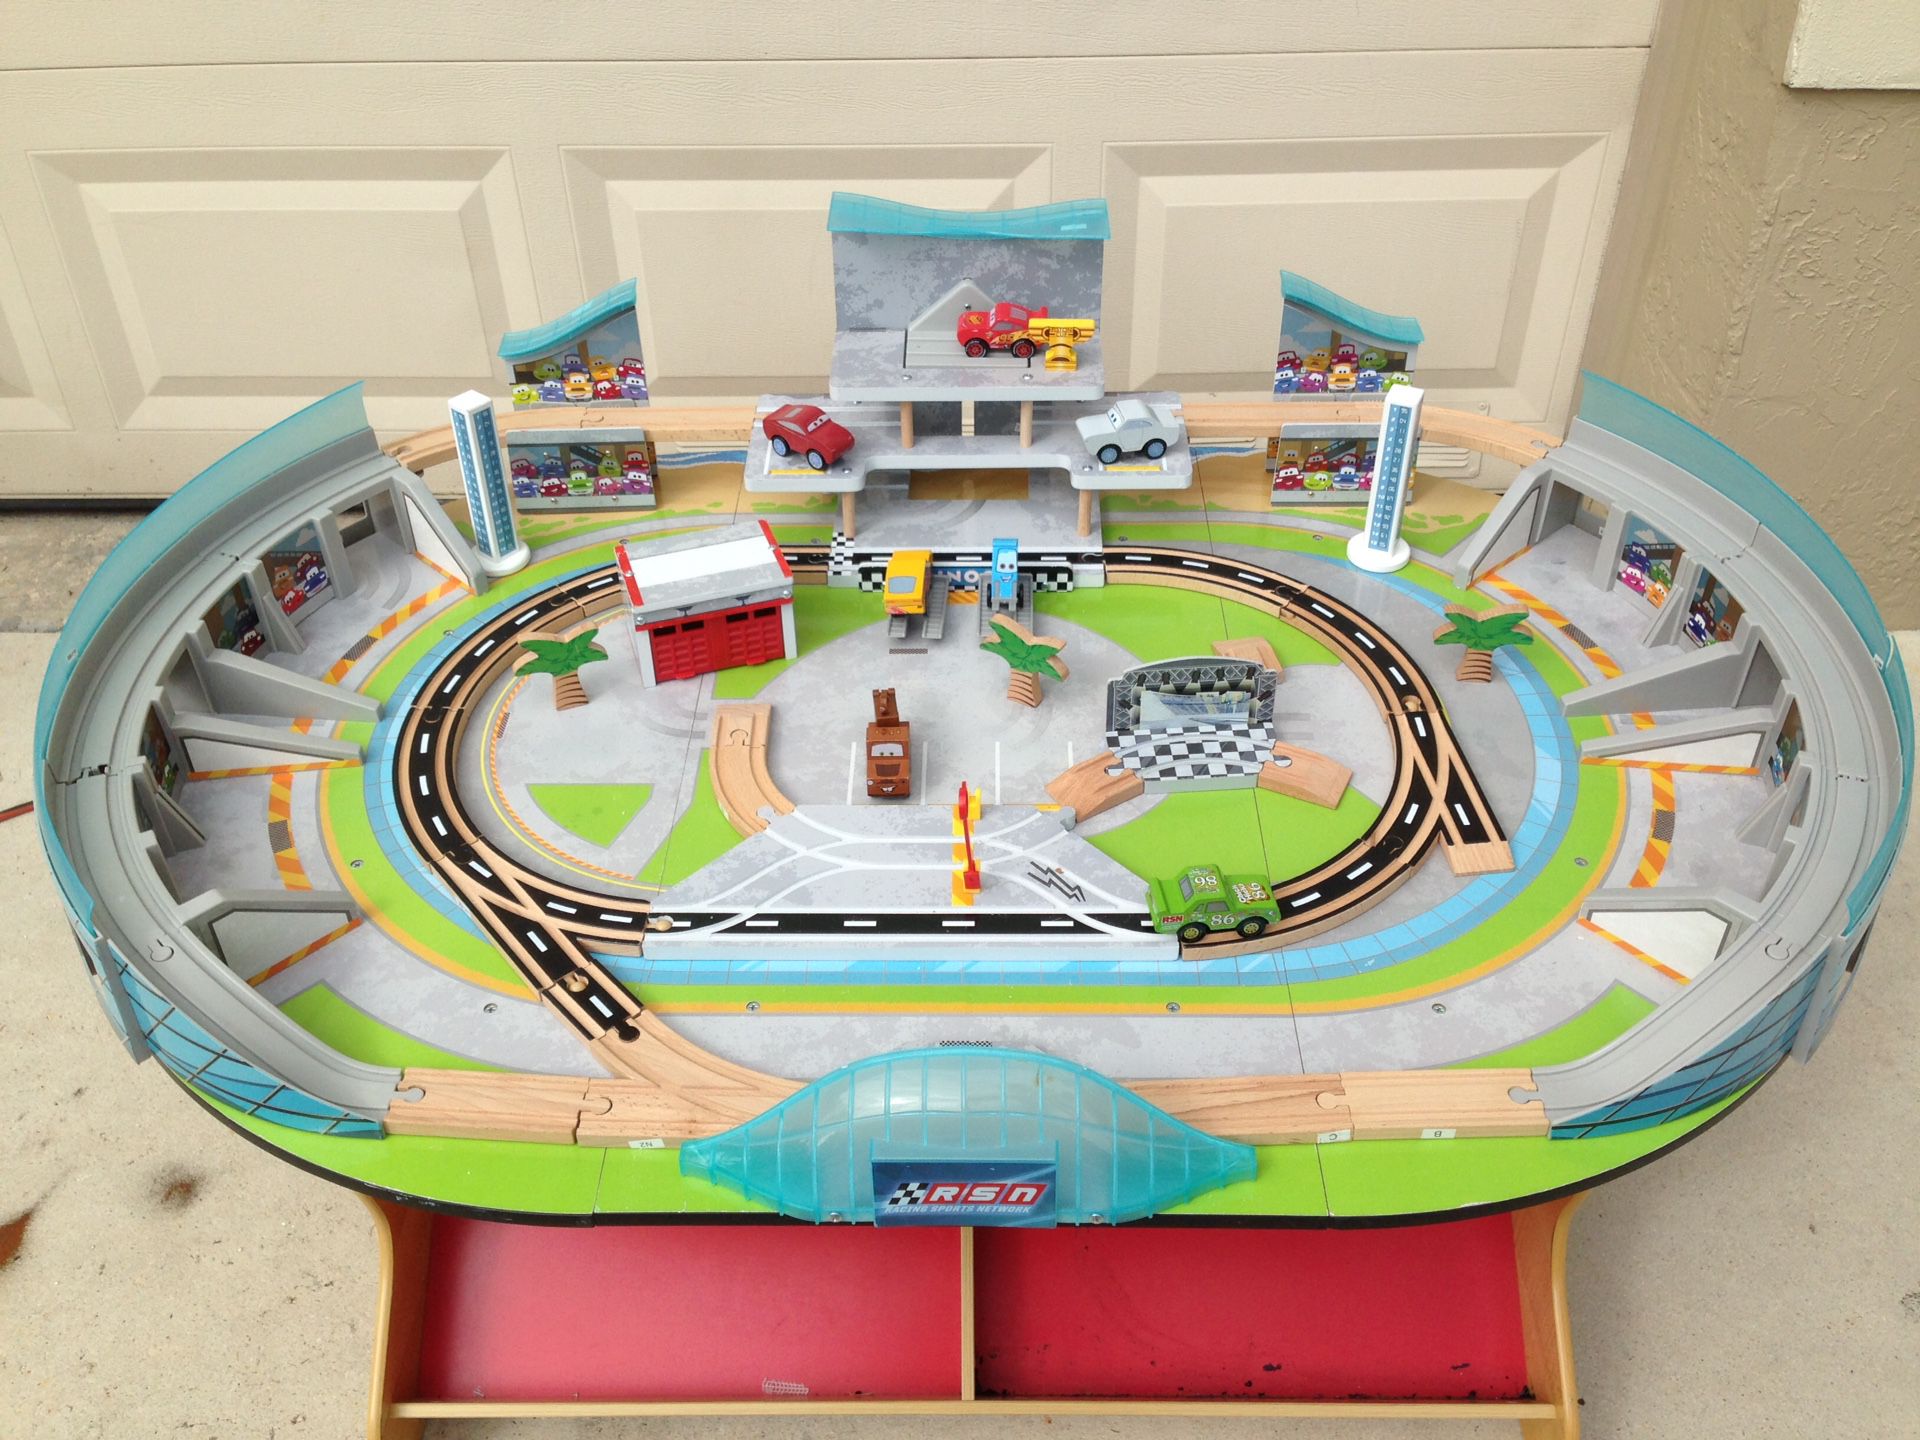 Paw Patrol Train Table for Sale in West Islip, NY - OfferUp